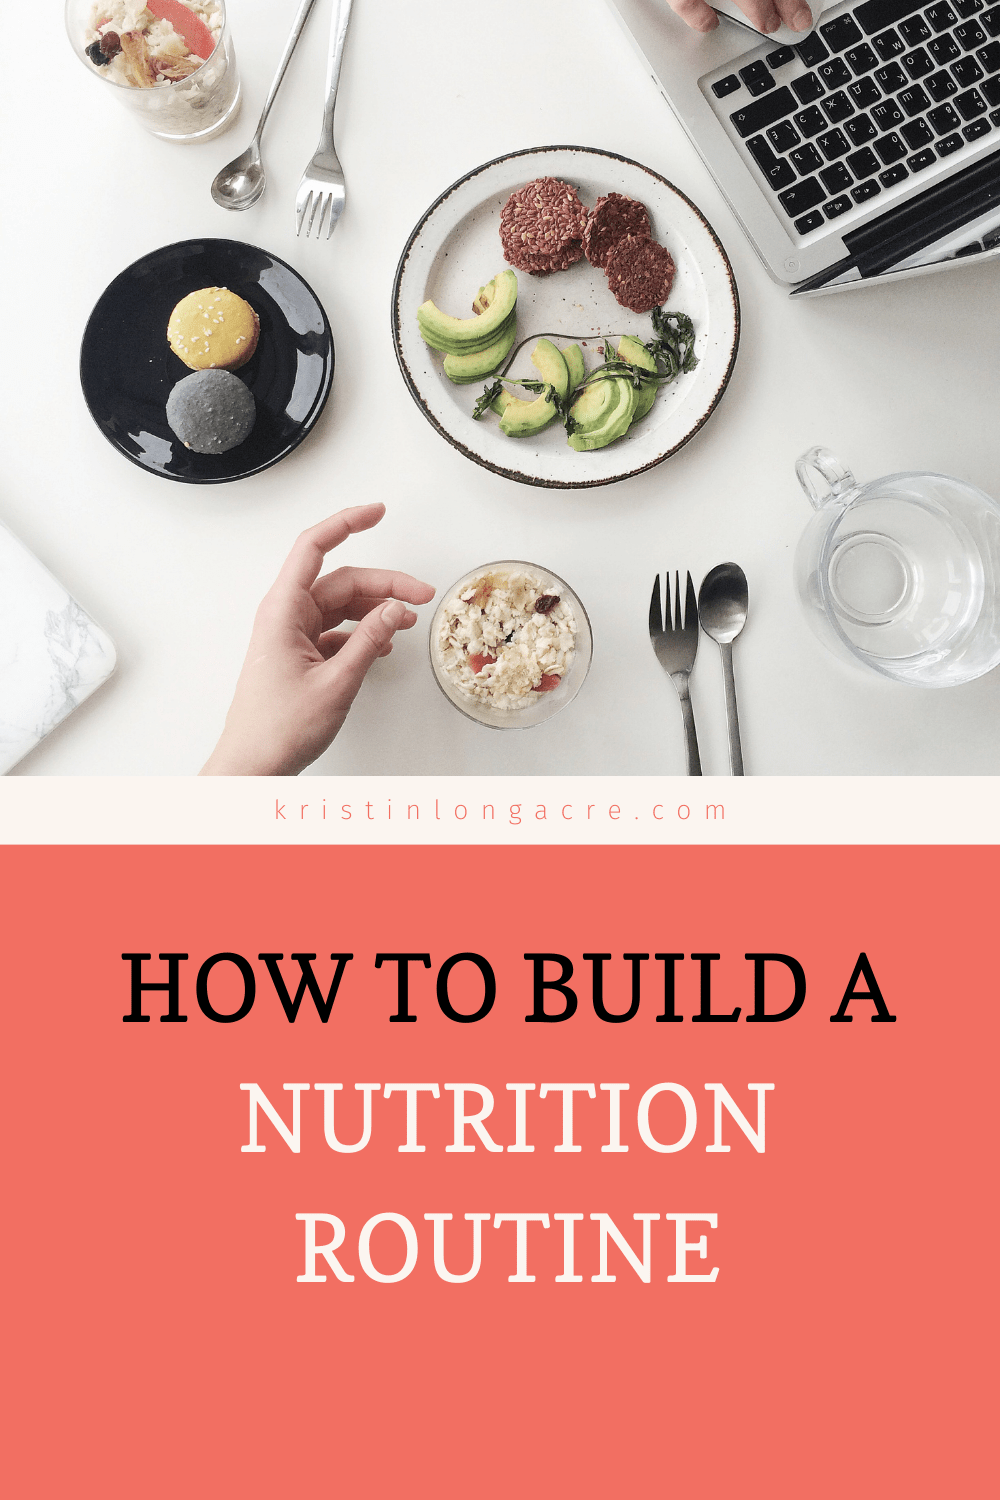 How To Build a Nutrition Routine